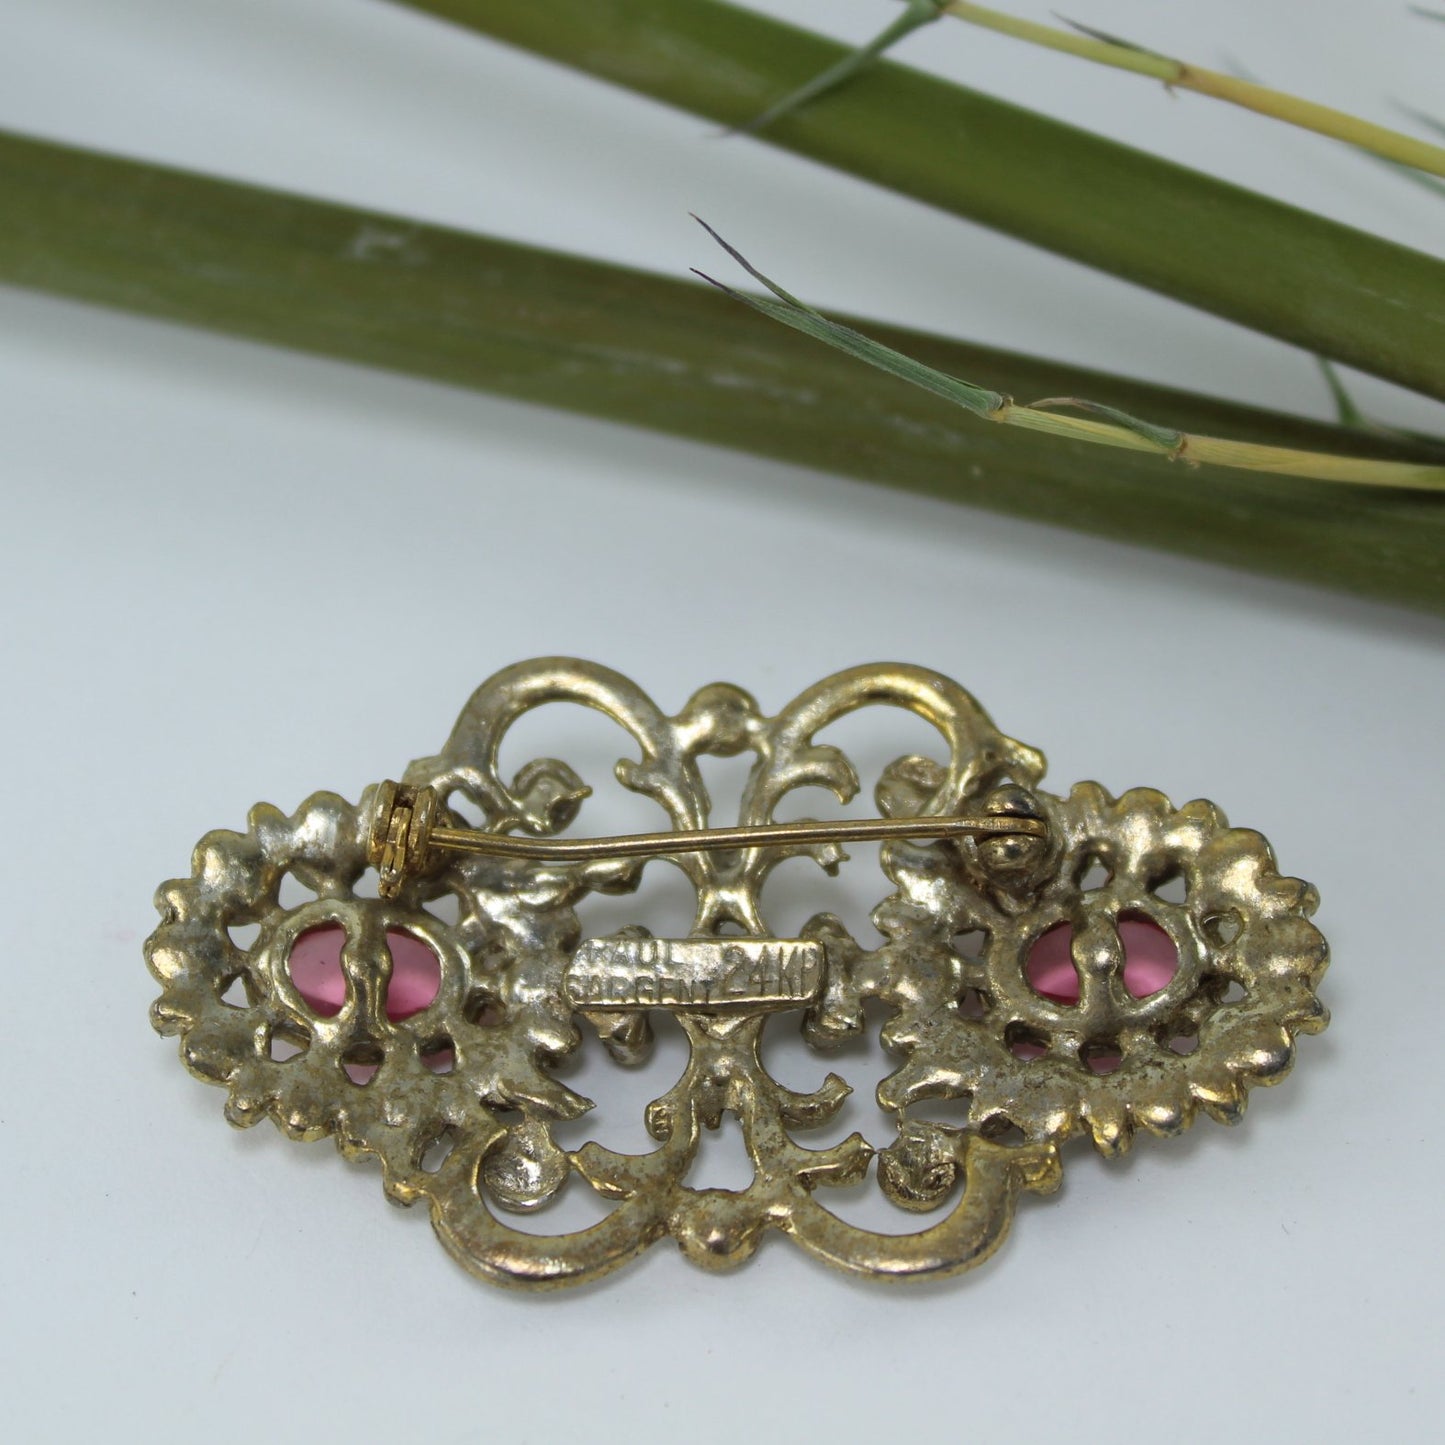 Paul Sargent Pin Brooch 24 KP Pearls Pink Ovals Fleur de Lis reverse of pin with maker mark